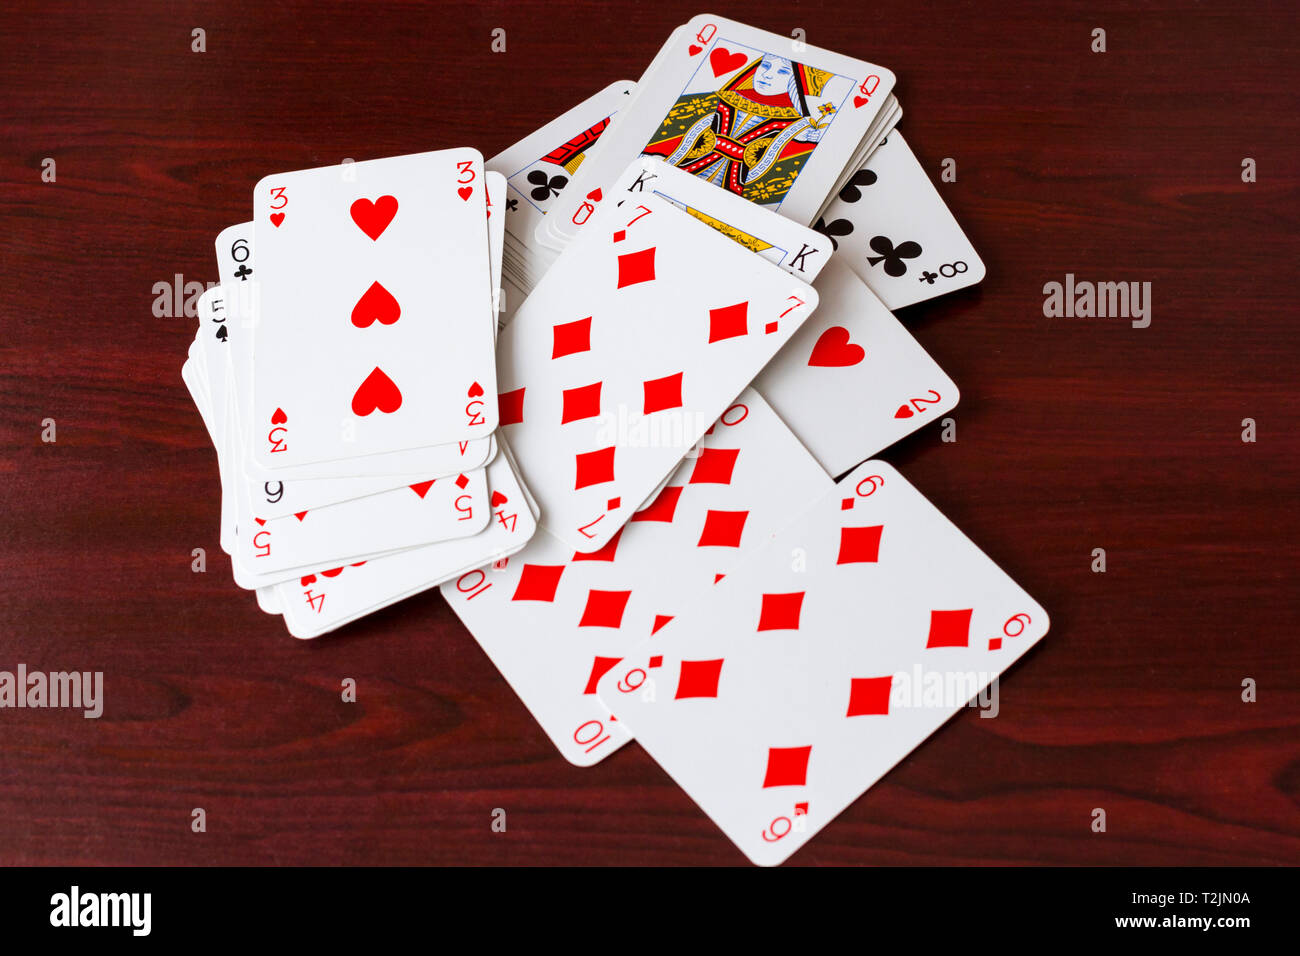 Some playing cards scattered on a dark wood table Stock Photo